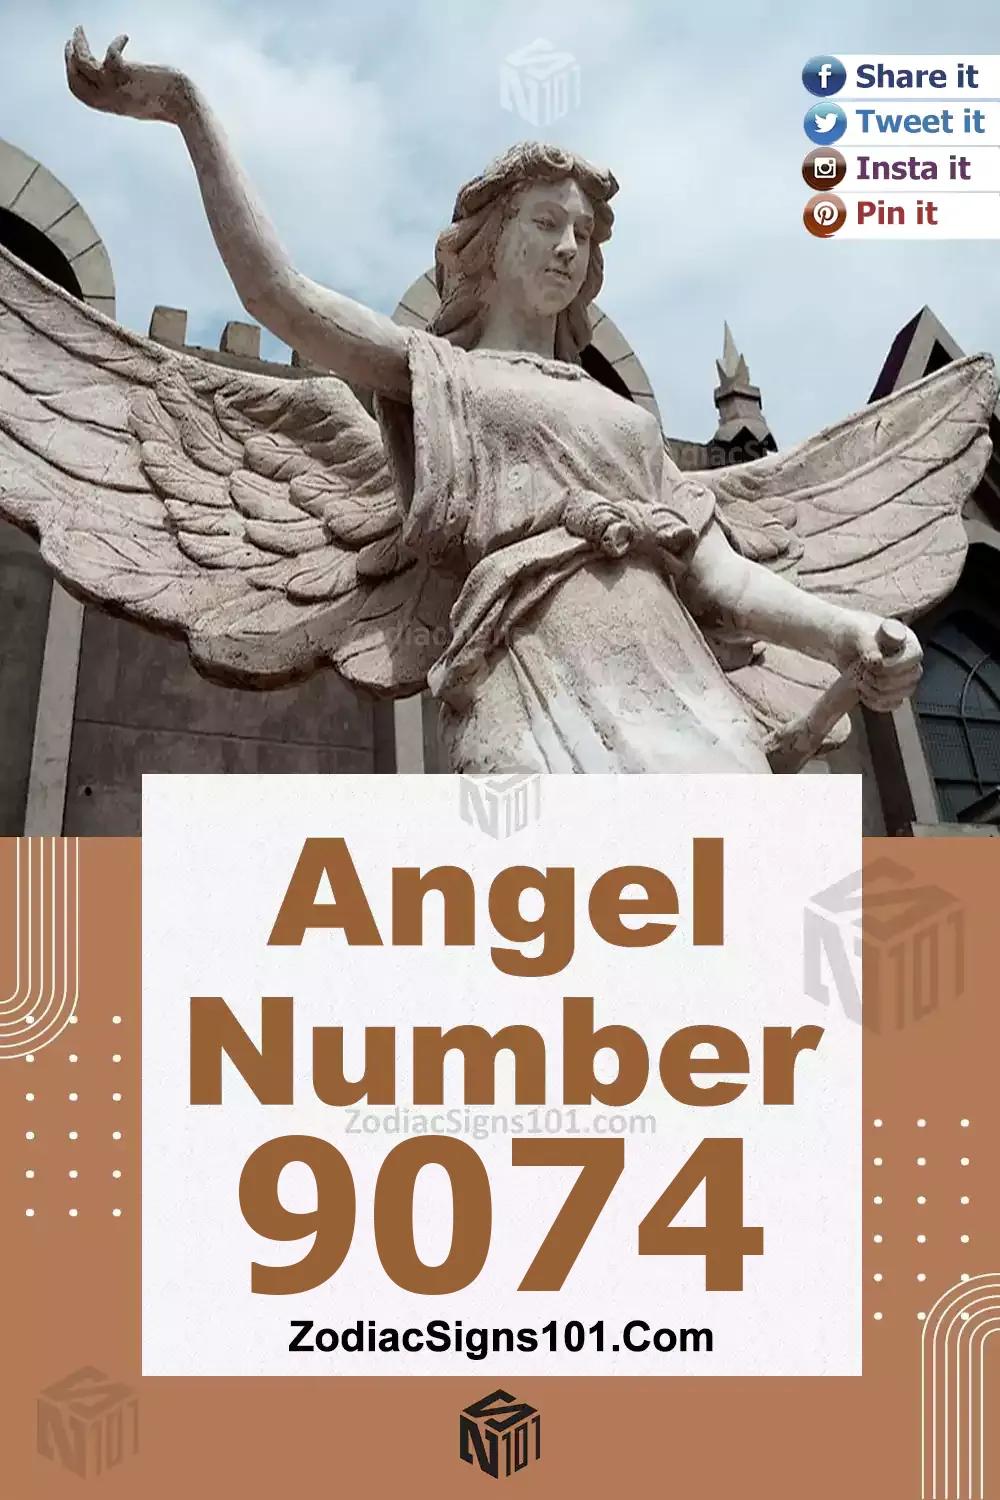 9074 Angel Number Meaning